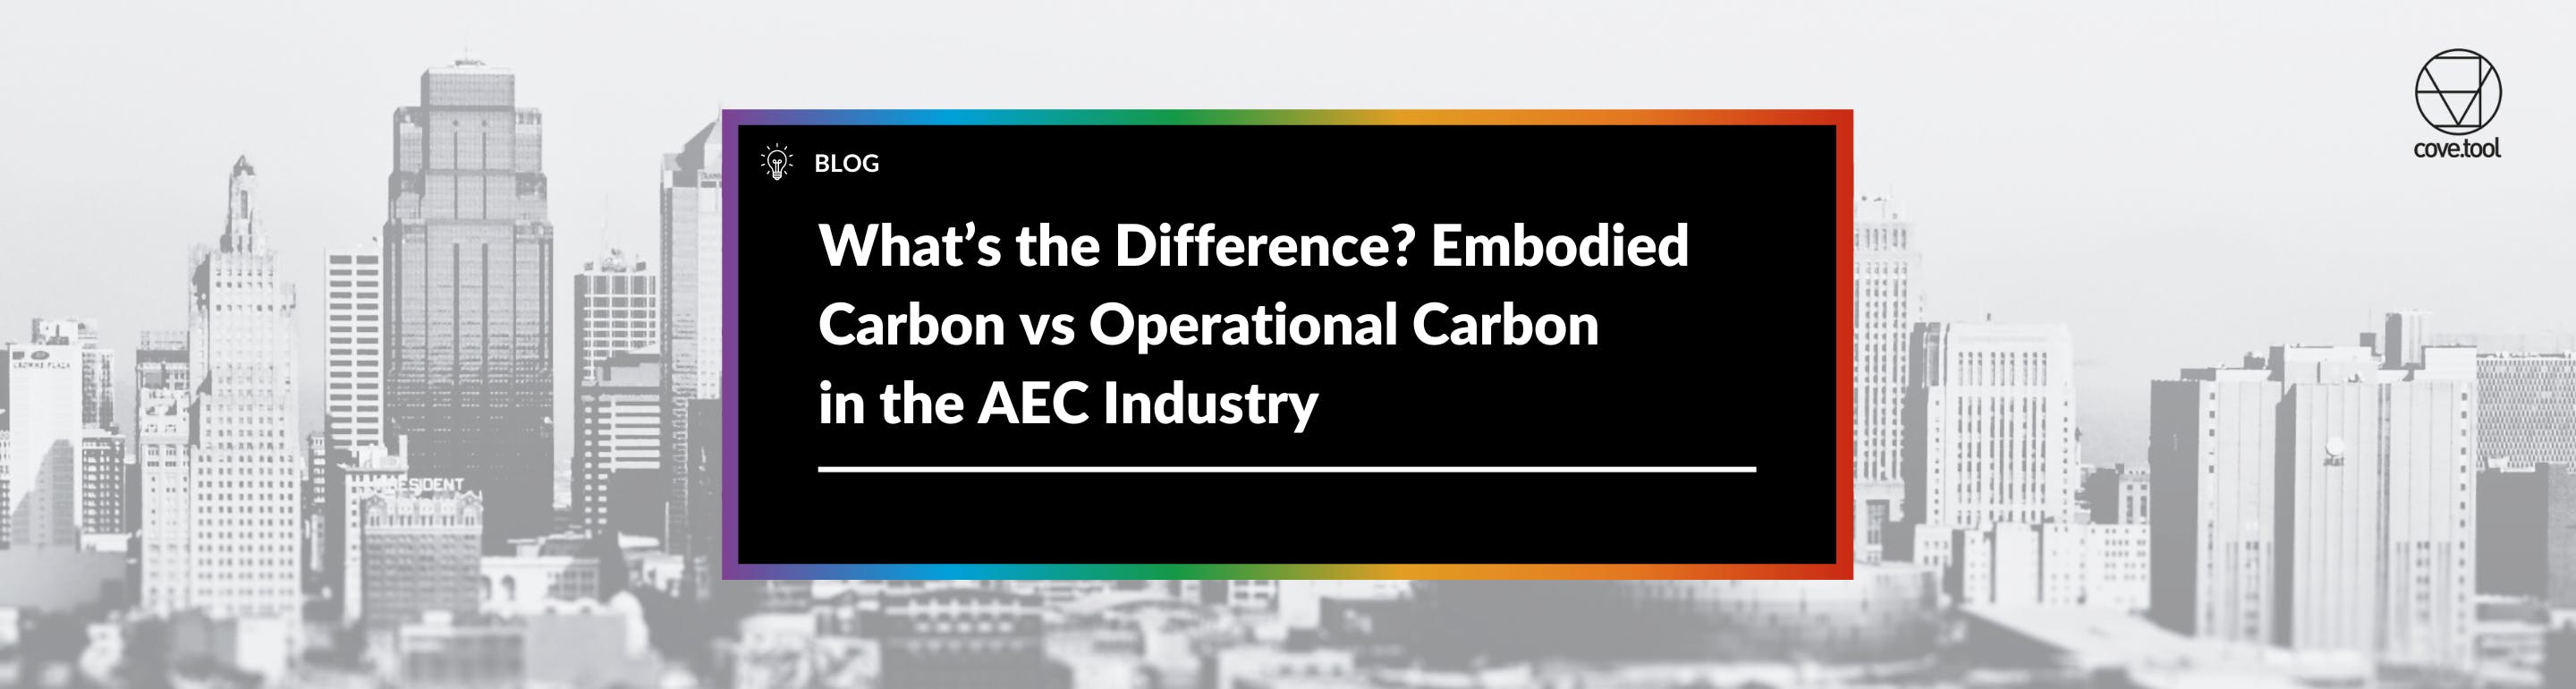 Embodied Carbon vs Operational Carbon in the AEC Industry  